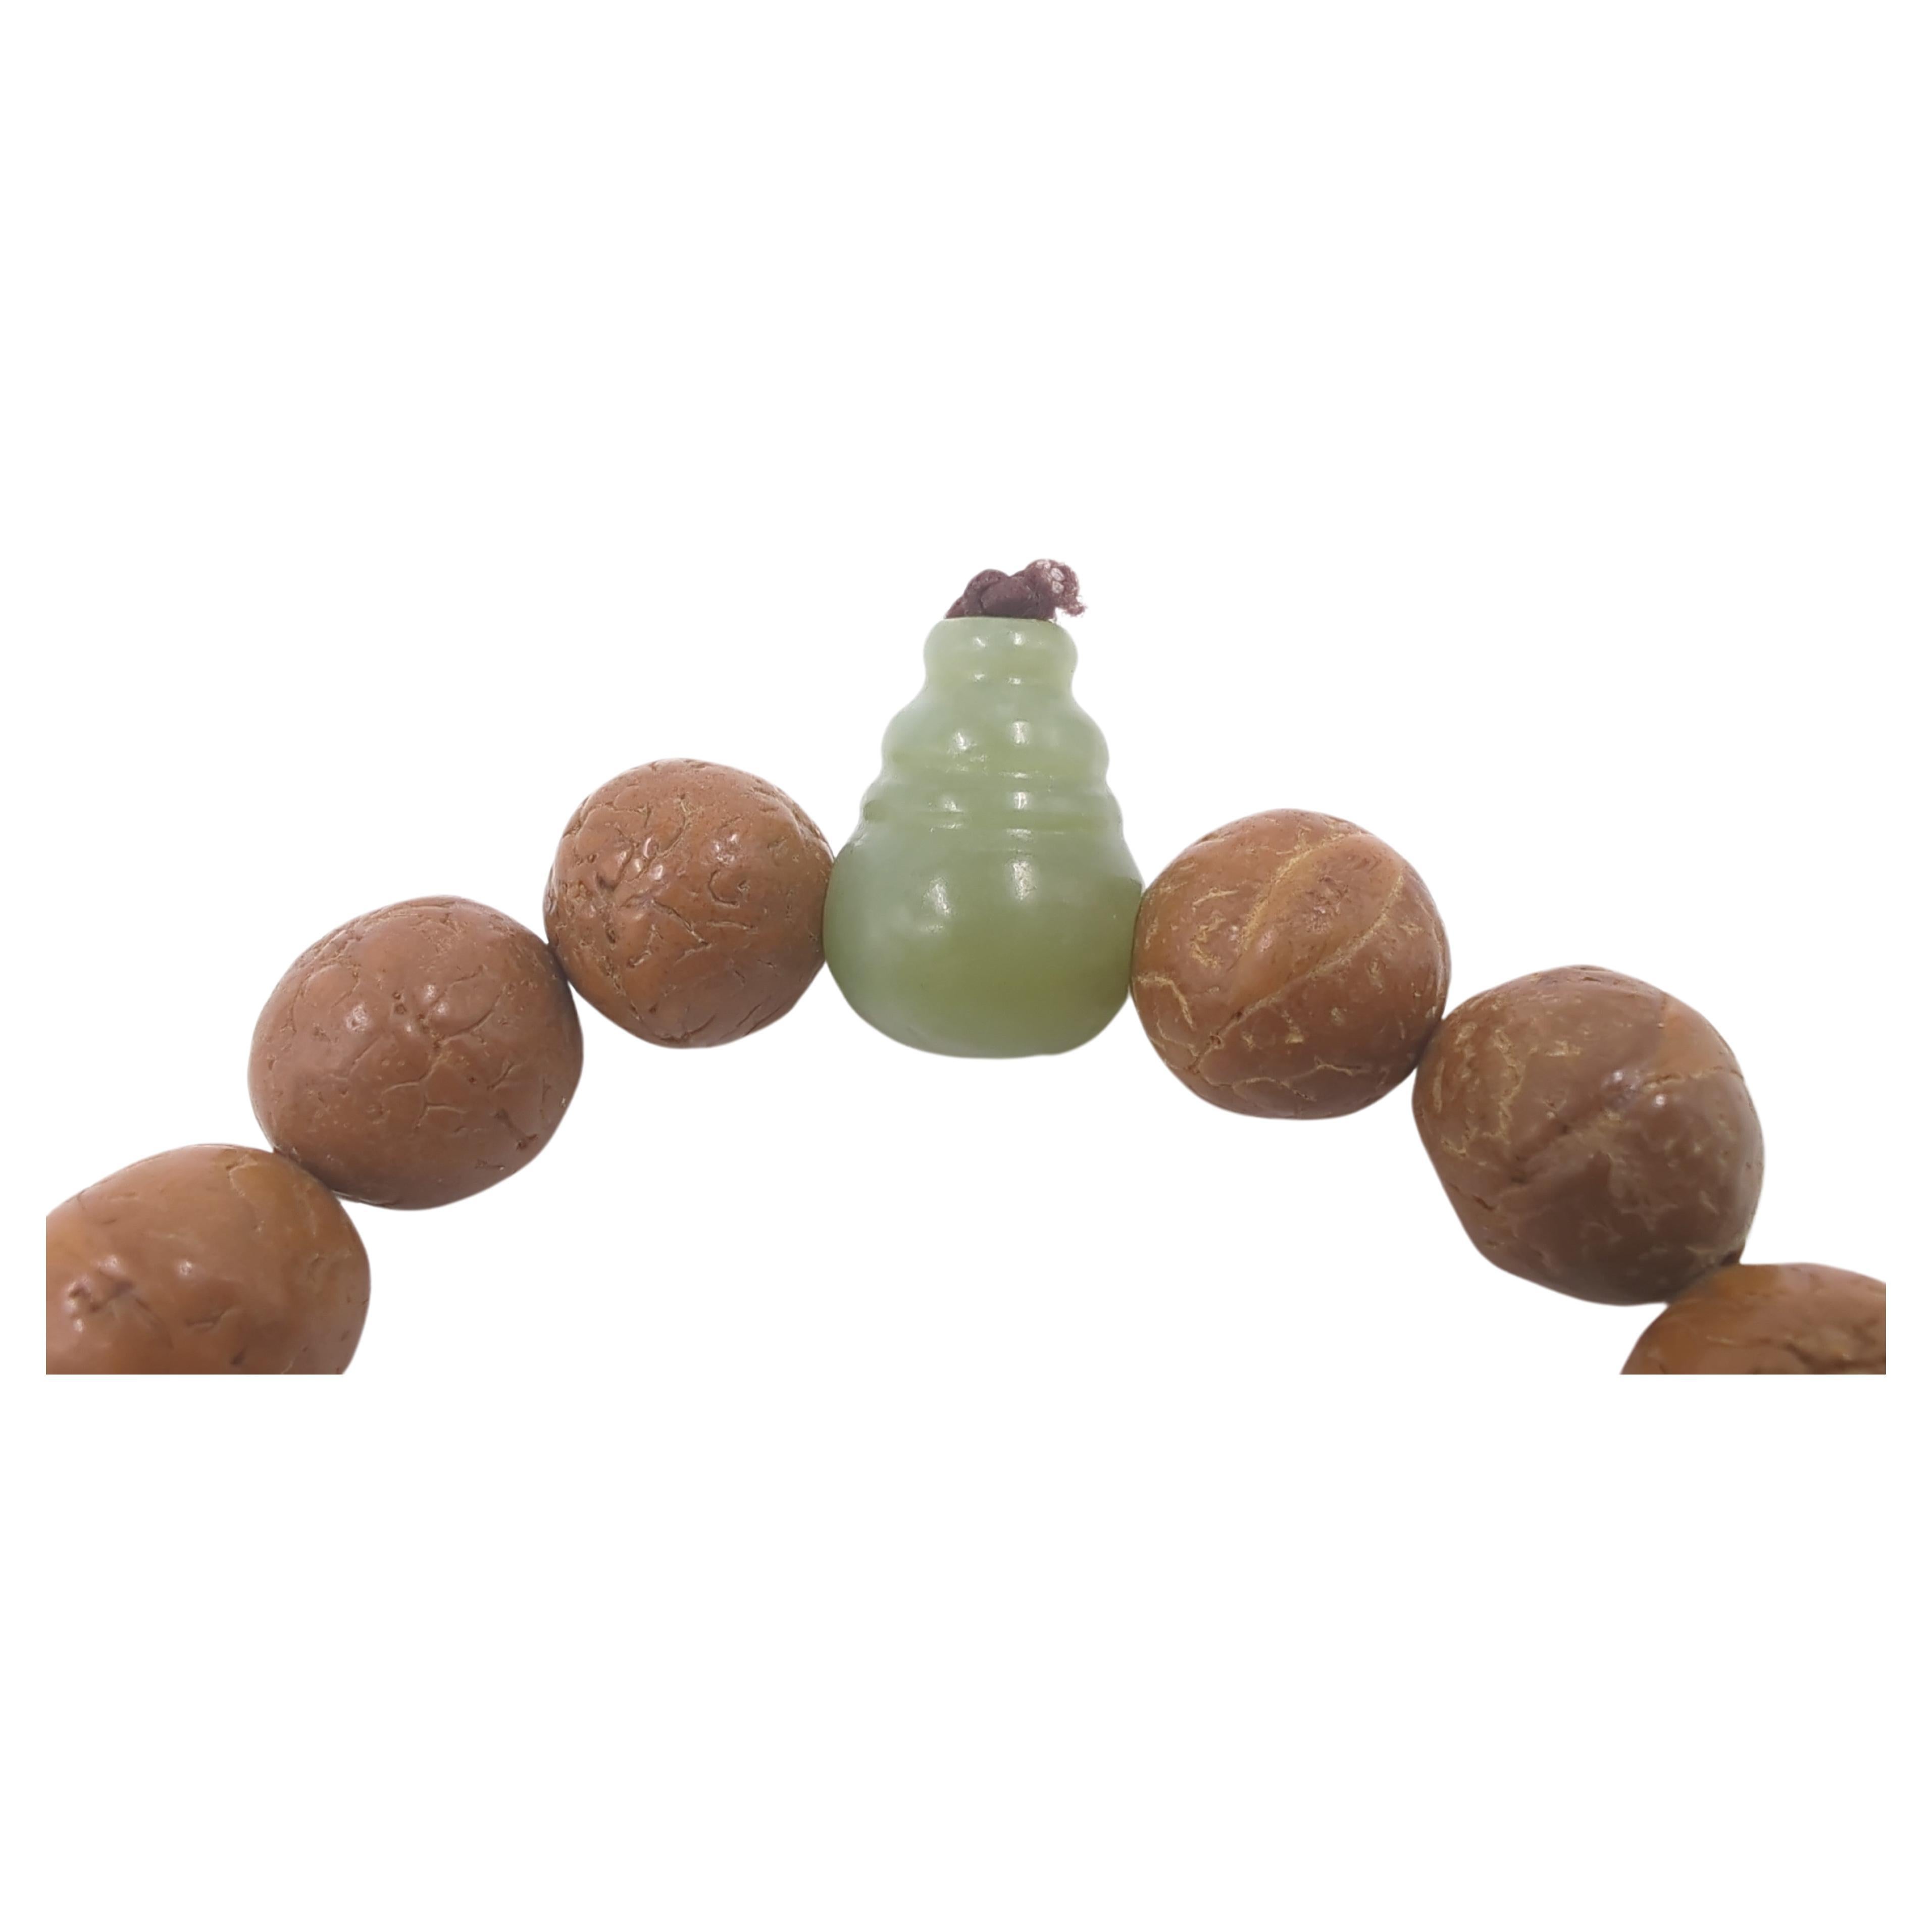 Antique Chinese Celadon Jade Hulu Bead Bodhi Seeds Bracelet - BEAUTIFUL PATINA In Good Condition For Sale In Richmond, CA